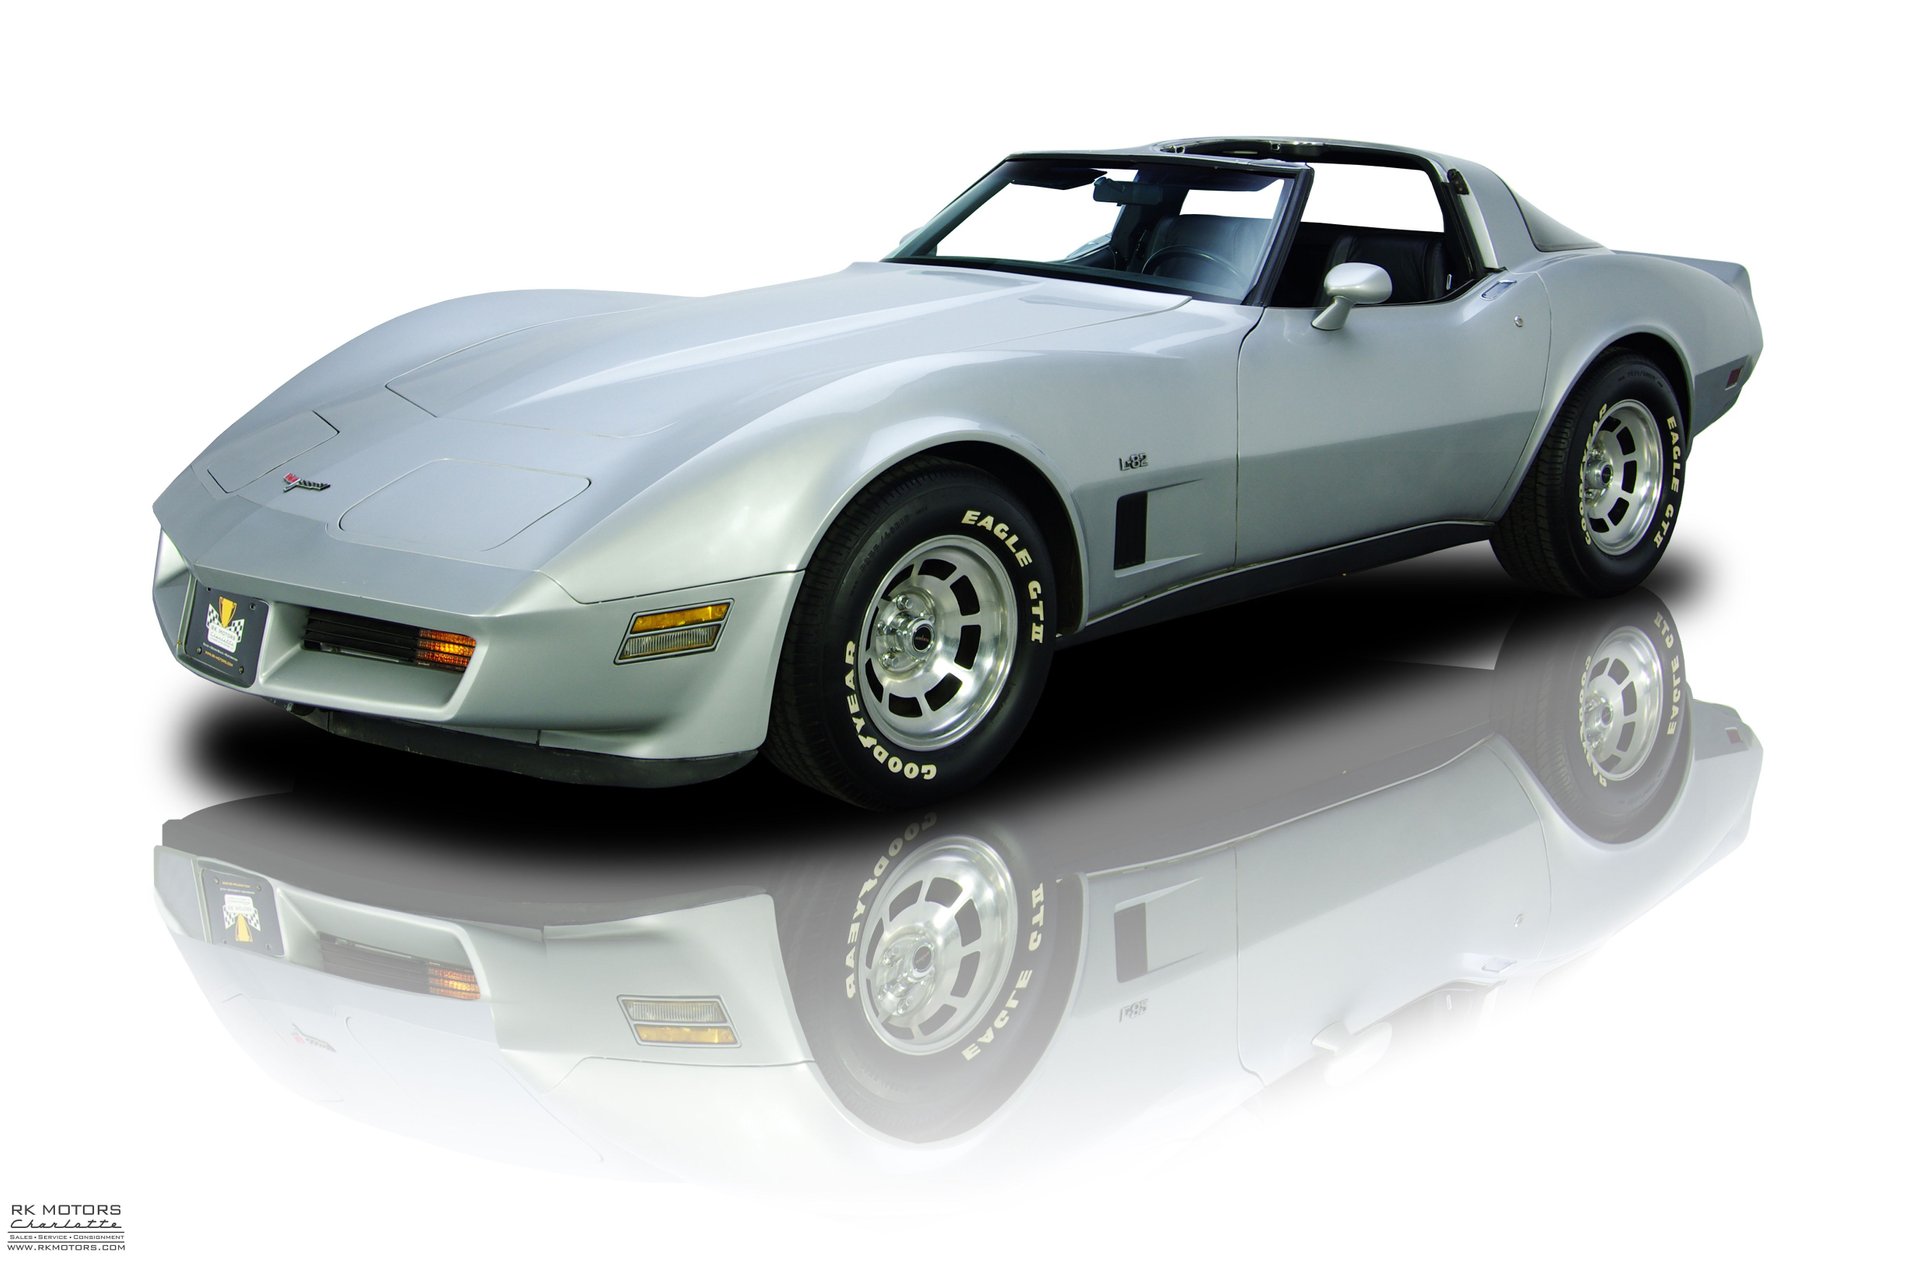 1980 Chevrolet Corvette | RK Motors Classic Cars and Muscle Cars for Sale